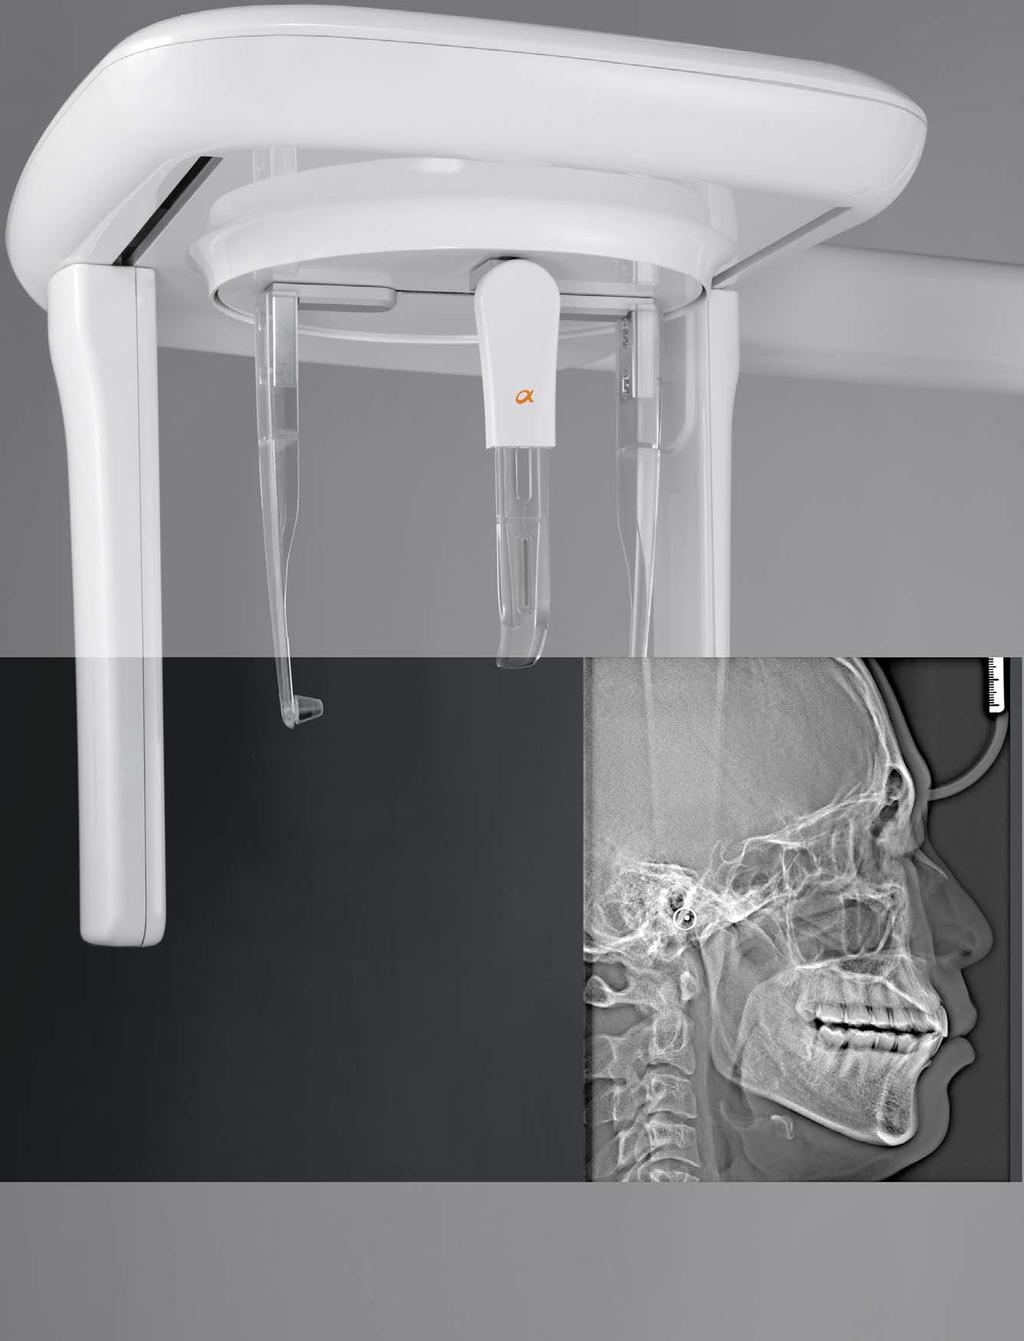 Proprietary CBCT reconstruction, Adaptive Moving Focus, and noise reduction technologies provide high quality images at optimized radiation exposure.